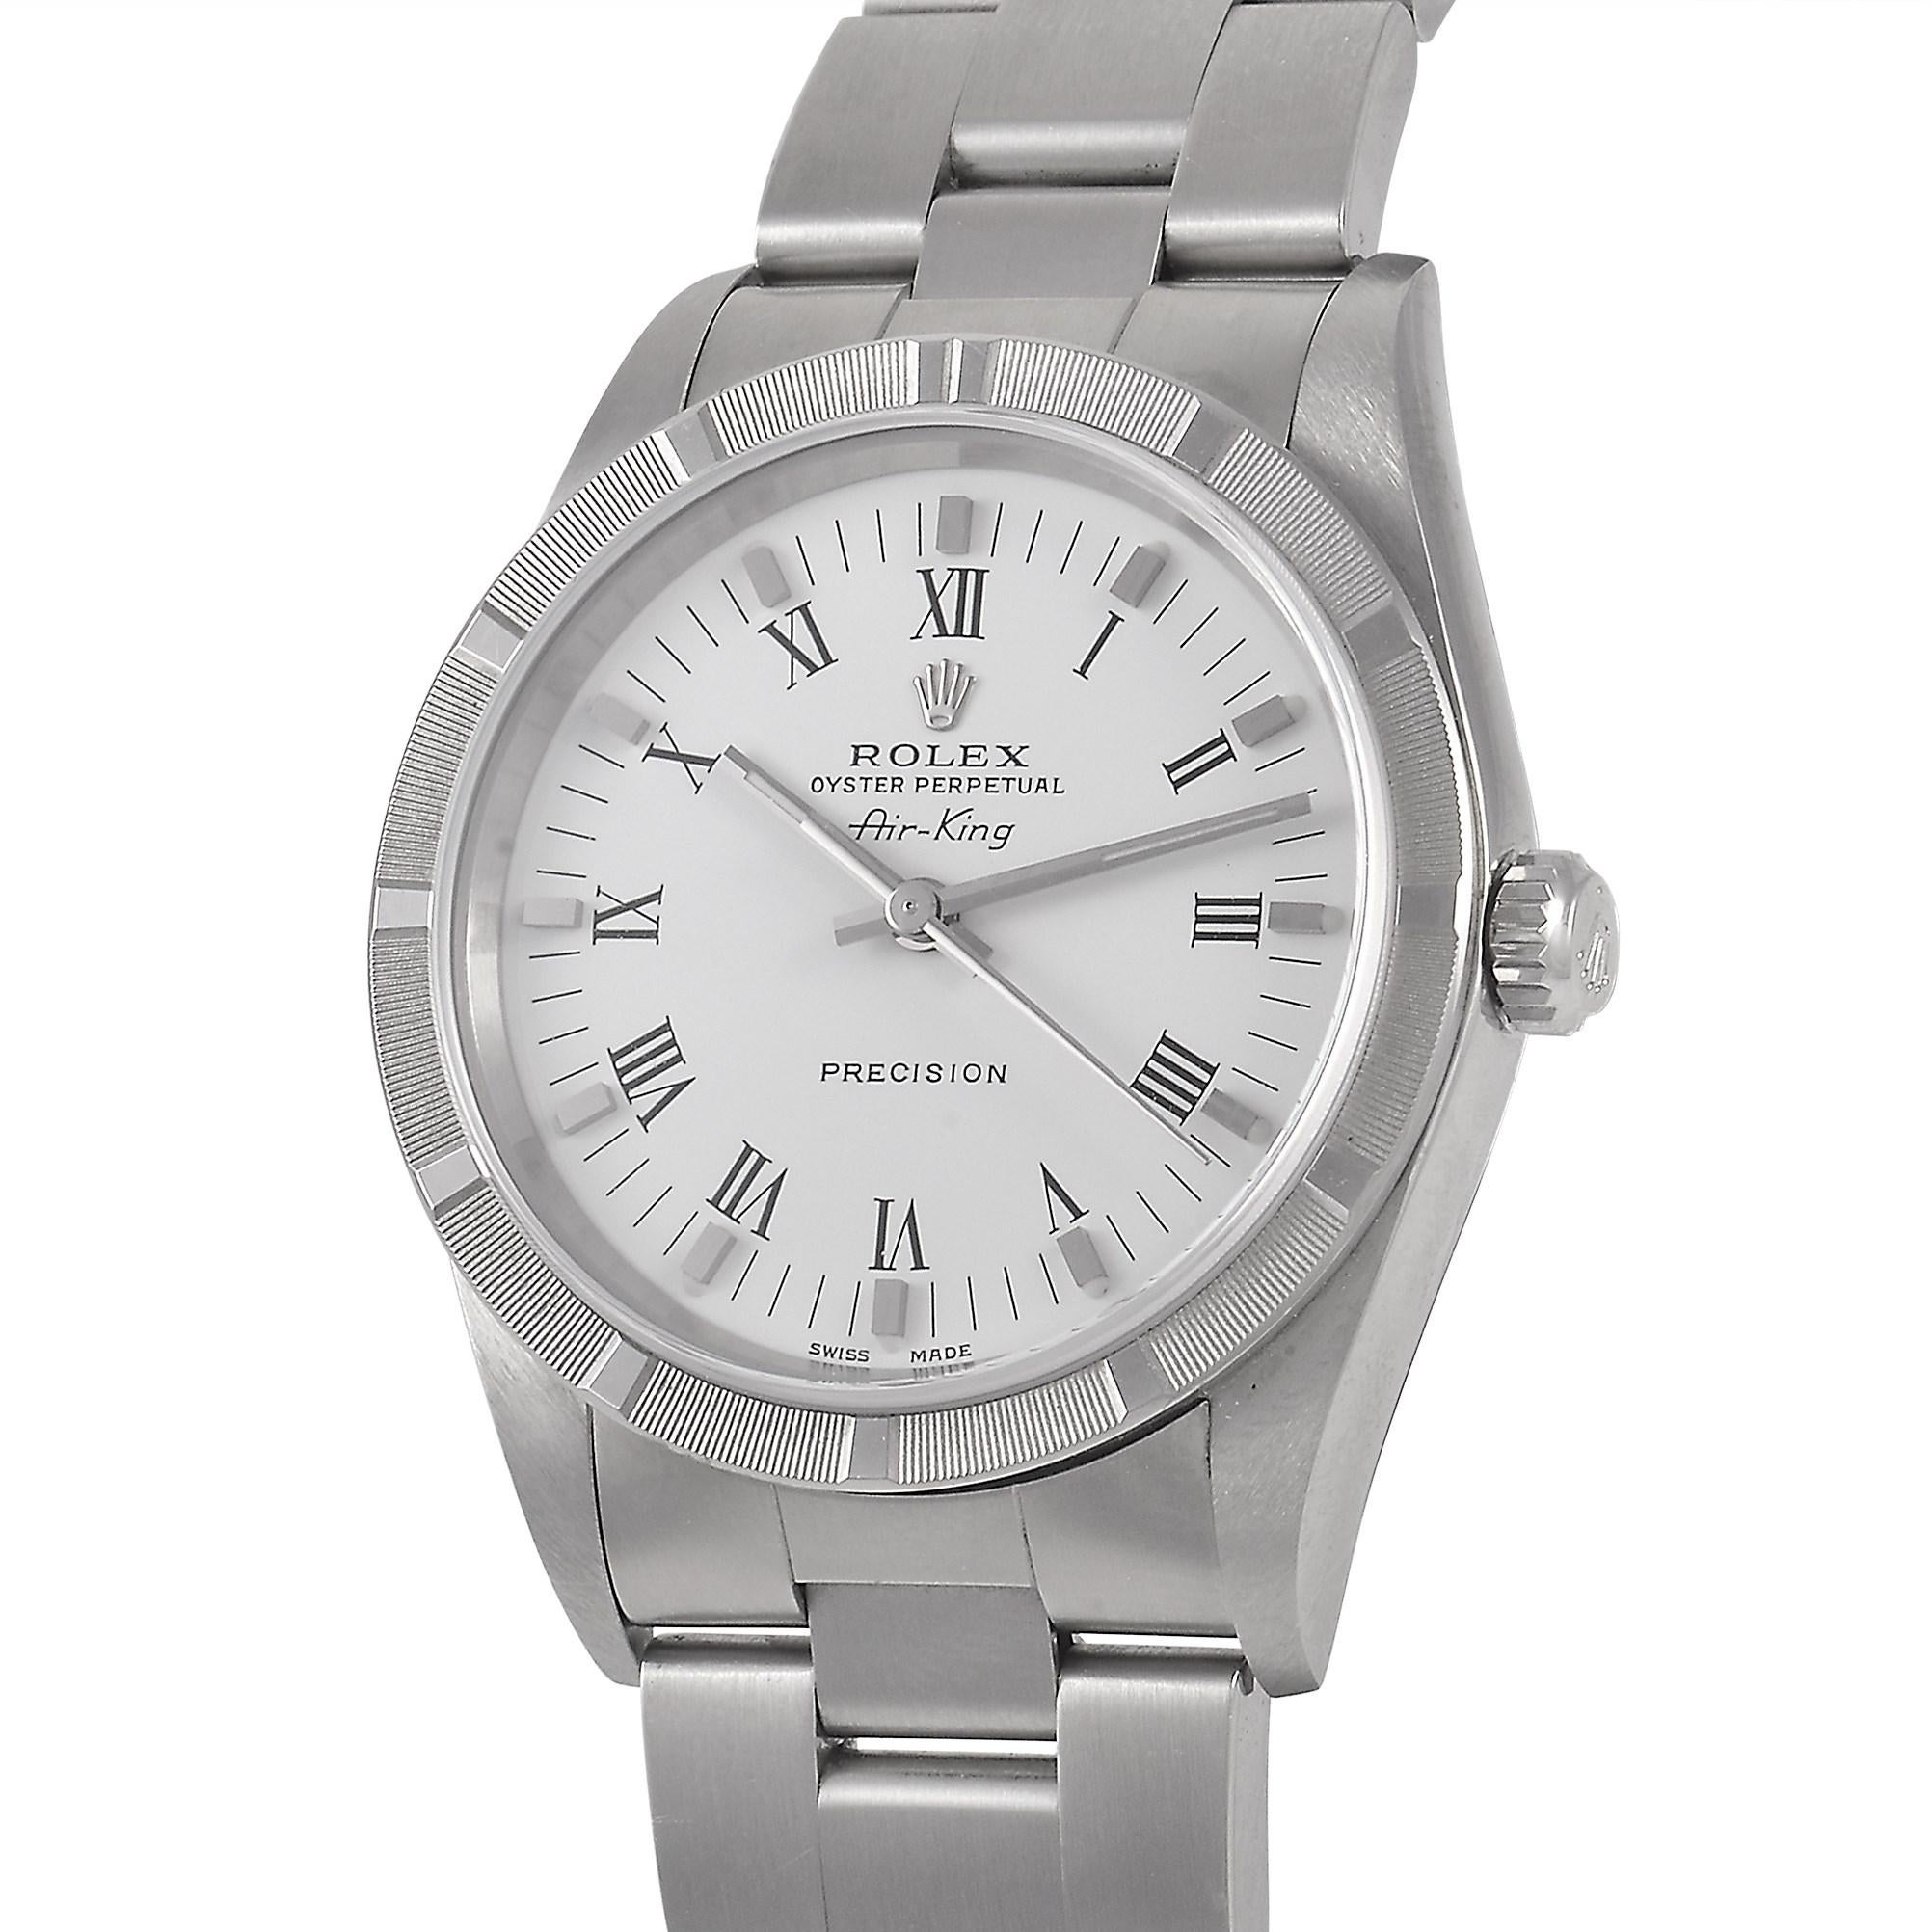 The Rolex Air-King Watch, reference number 14010M, possesses a truly timeless sense of style.

This luxury timepiece includes a 34mm case, index bezel, and Oyster bracelet crafted from shimmering stainless steel. On the minimalist white dial, you’ll